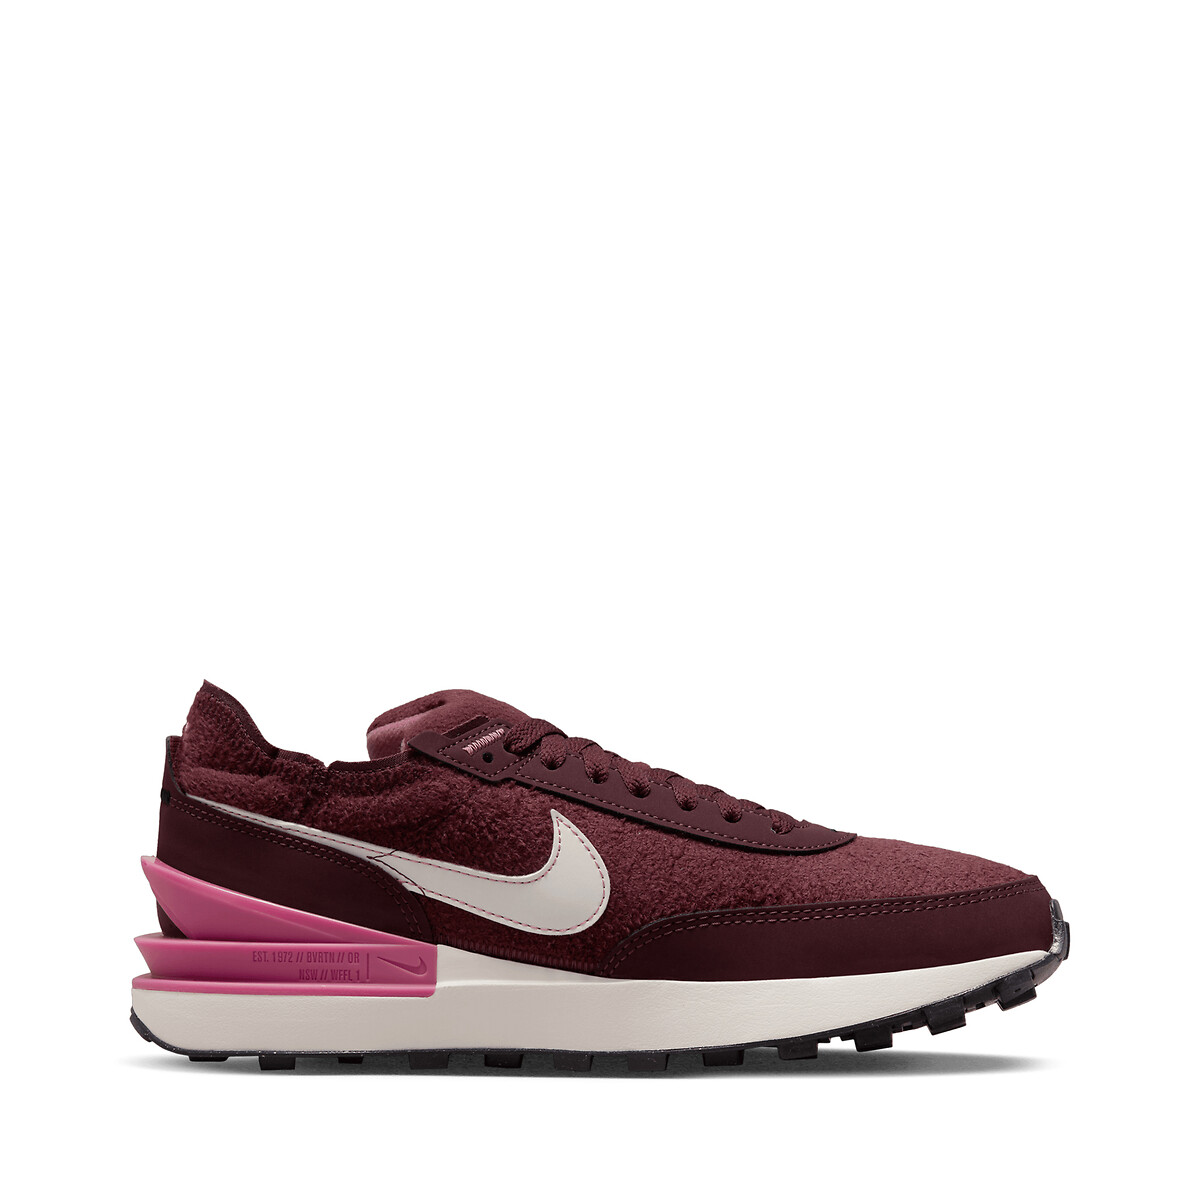 Waffle one se trainers, burgundy red, Nike | La Redoute